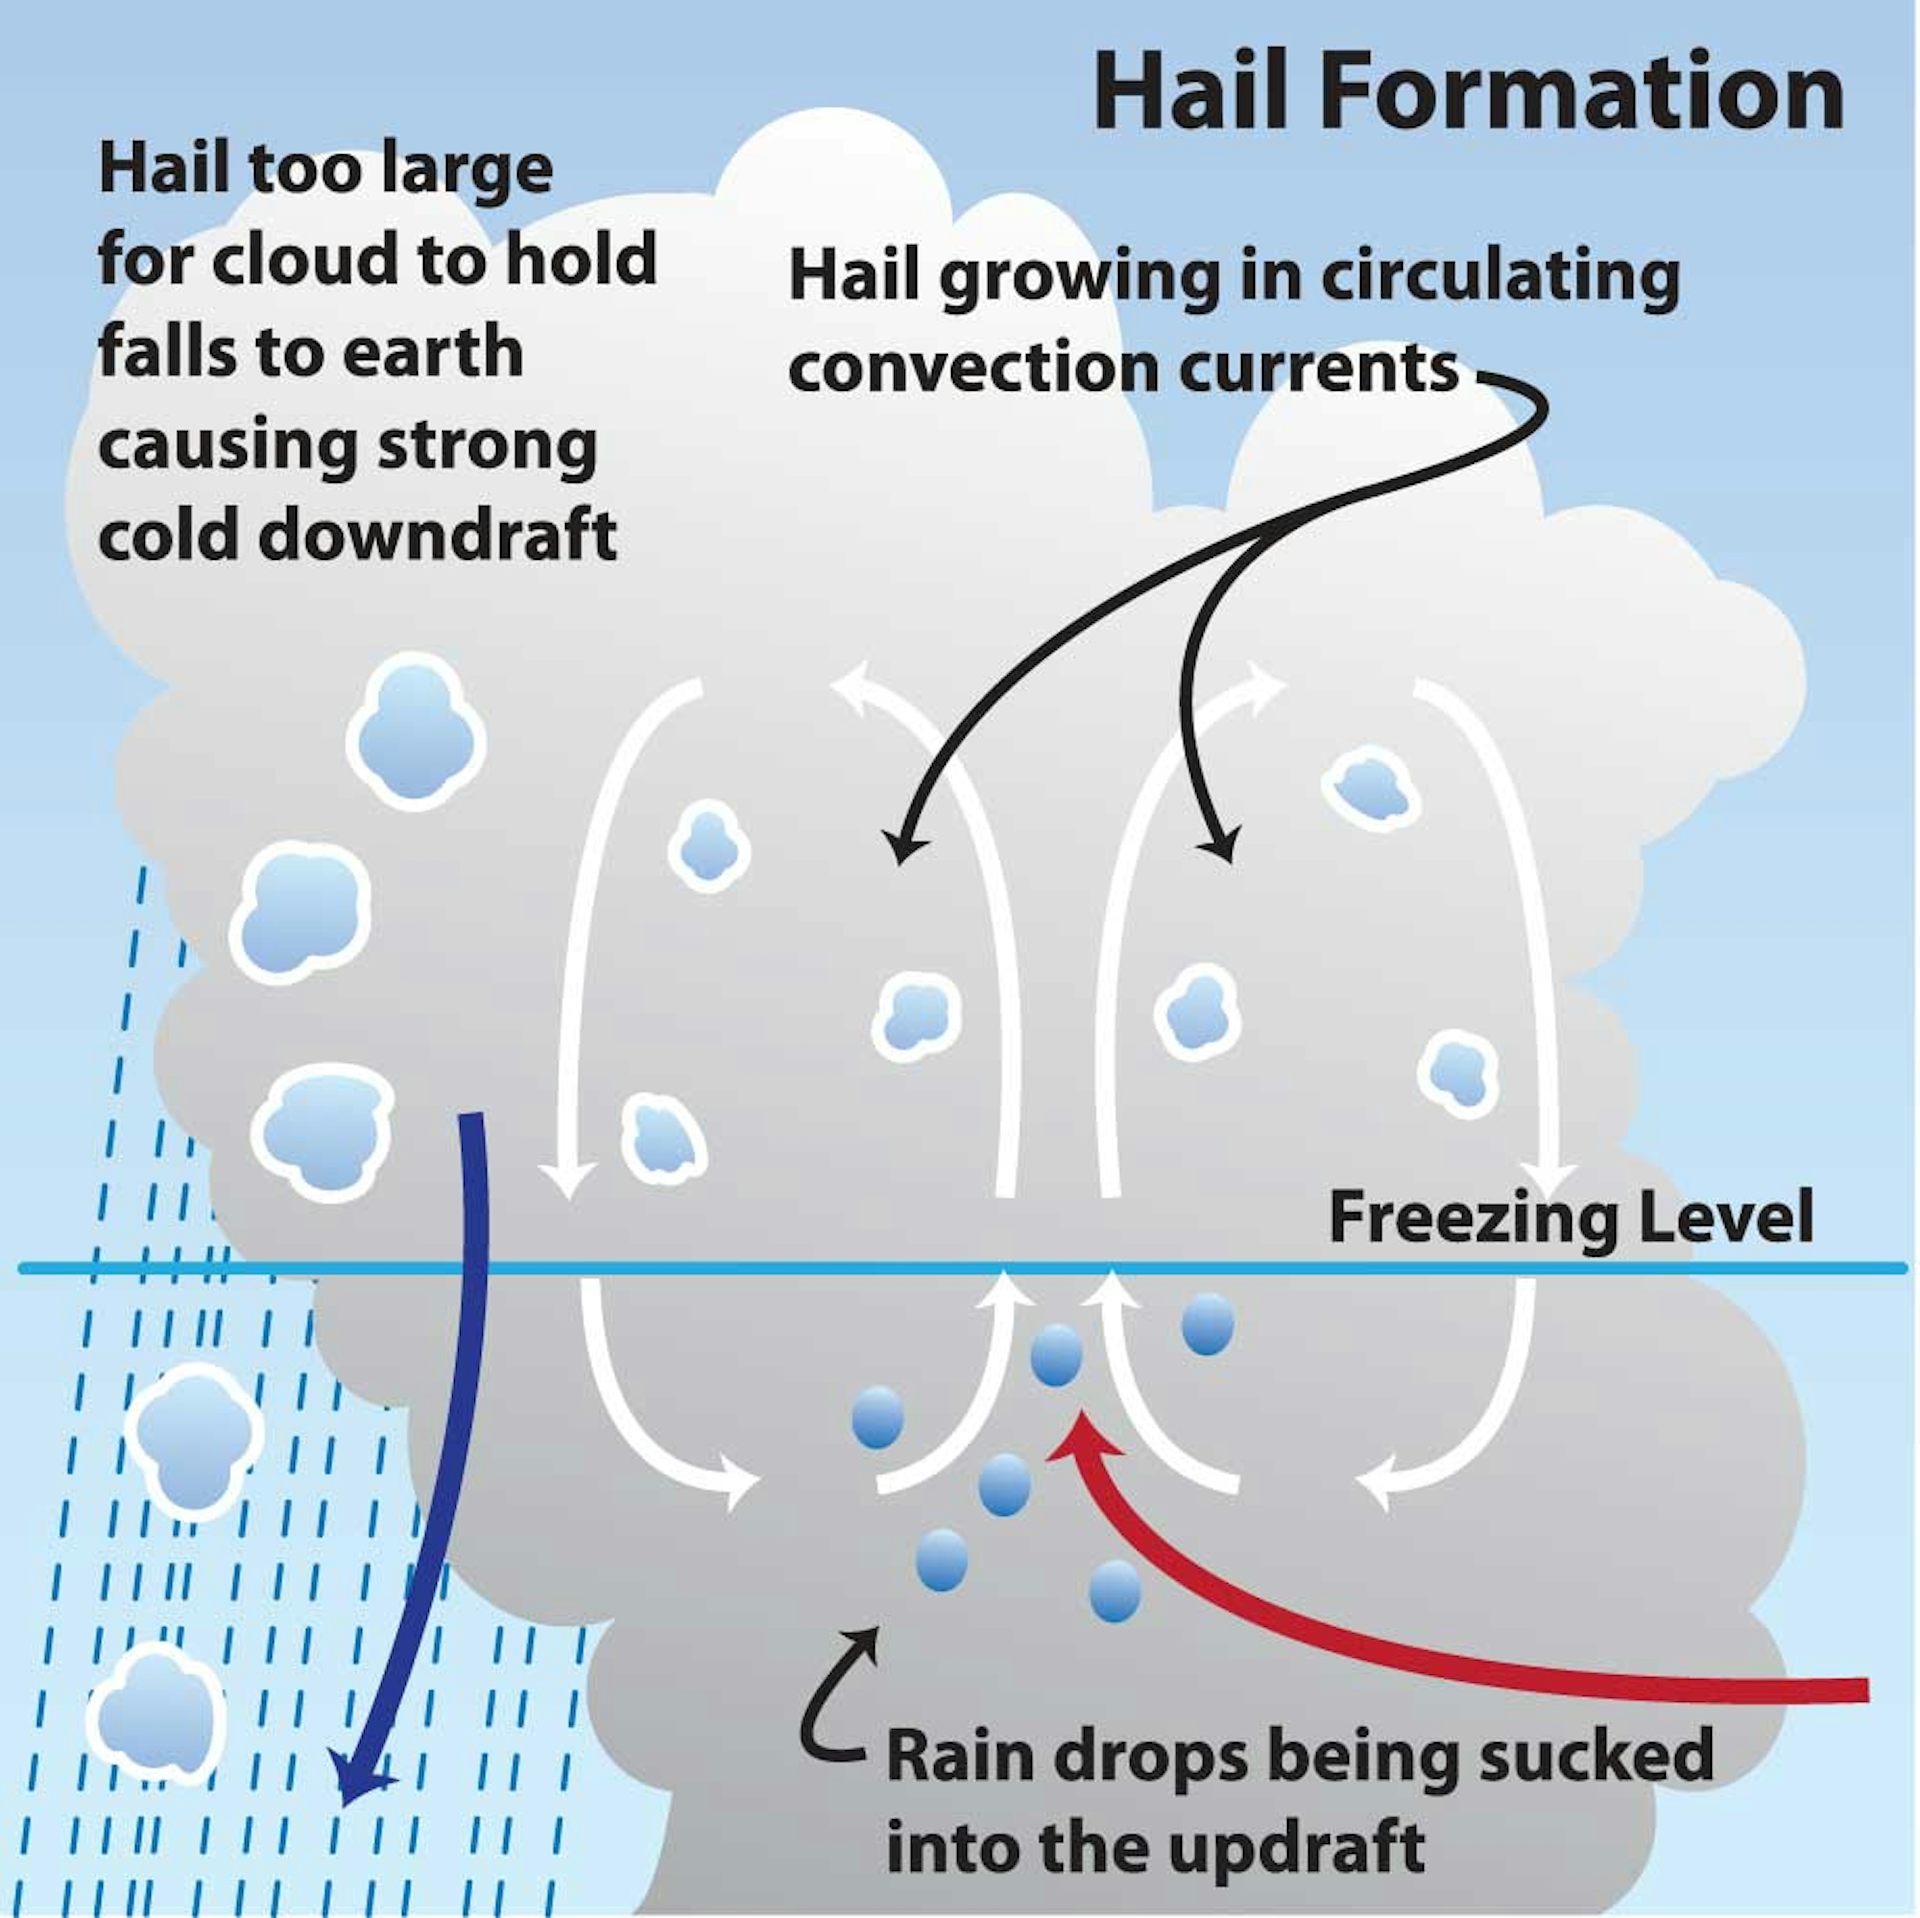 in basic terms, hailstones form as water is lofted into the